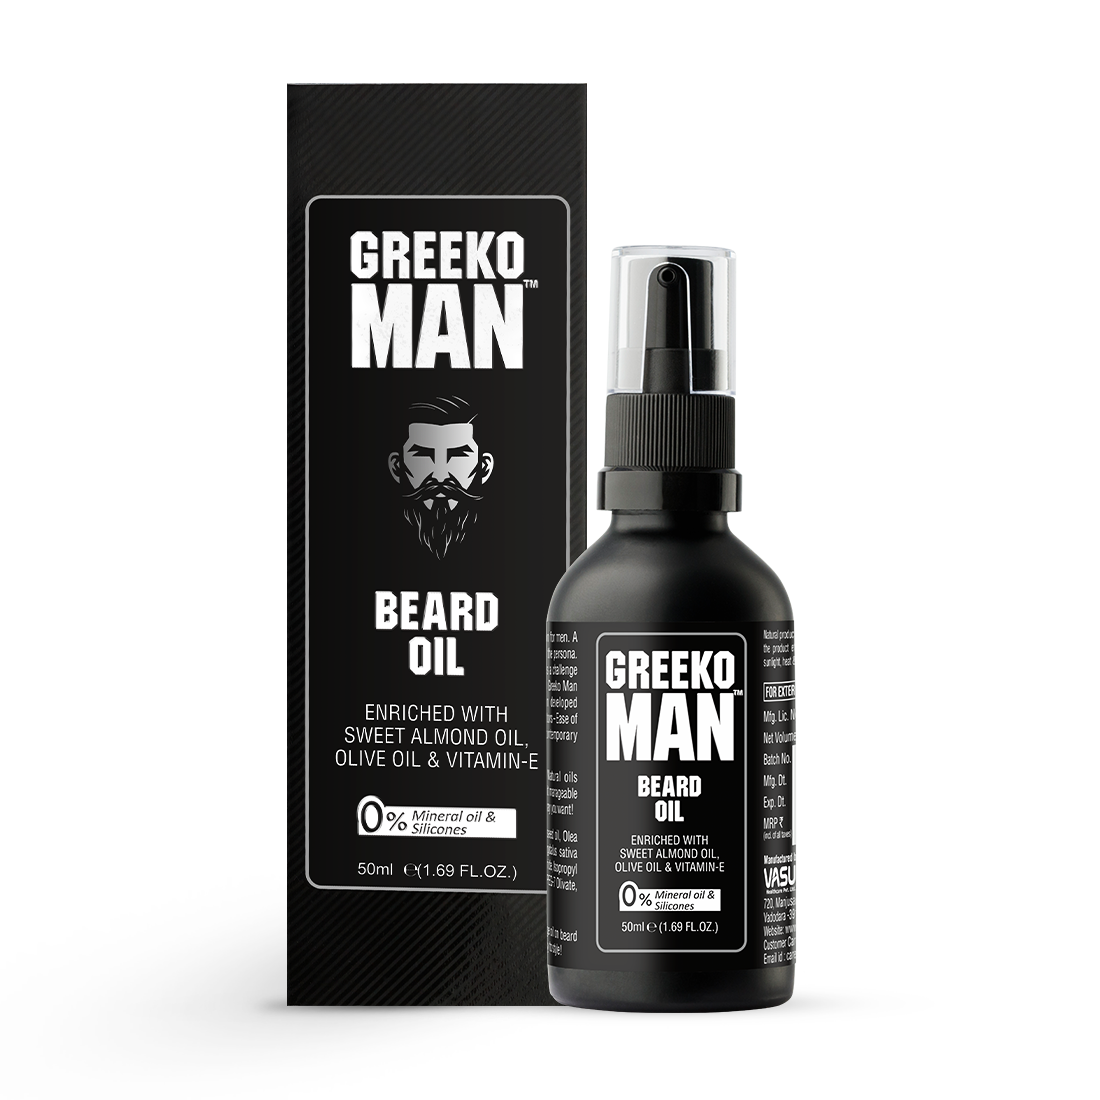 Greeko Man Beard Oil - Enriched with Almond Oil, Olive Oil & Vitamin E - It Nourishes & Softens beard and Making It Manageable - Promotes Healthy Beard Growth